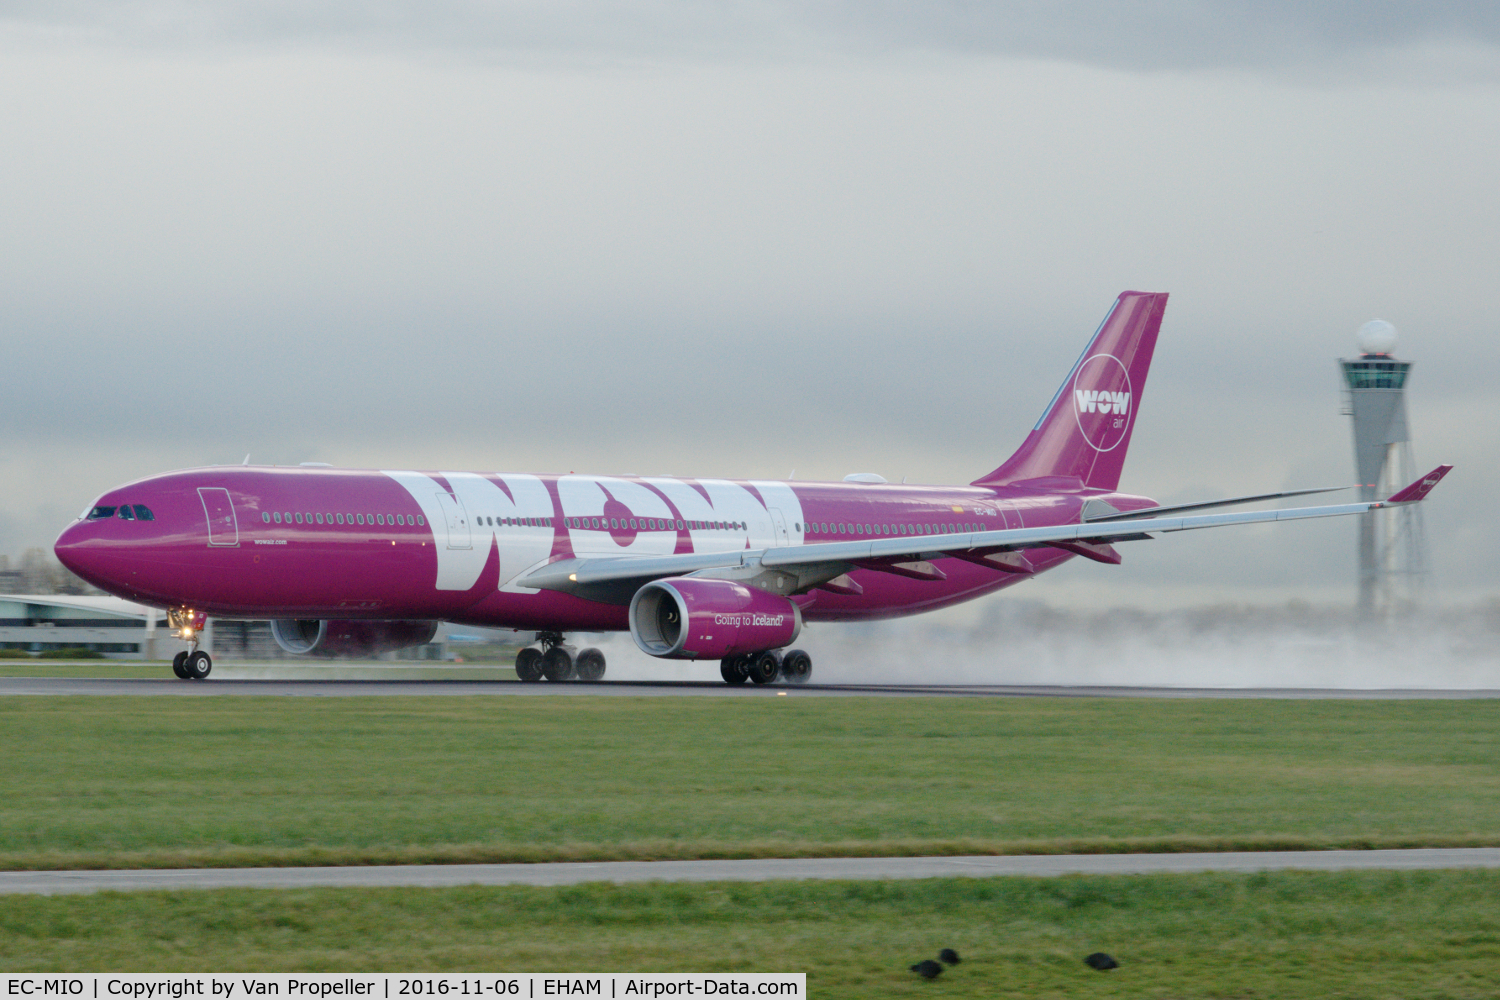 EC-MIO, 2015 Airbus A330-343 C/N 1624, WOW Air Airbus A330-343 taking off from a wet runway at Schiphol airport, the Netherlands